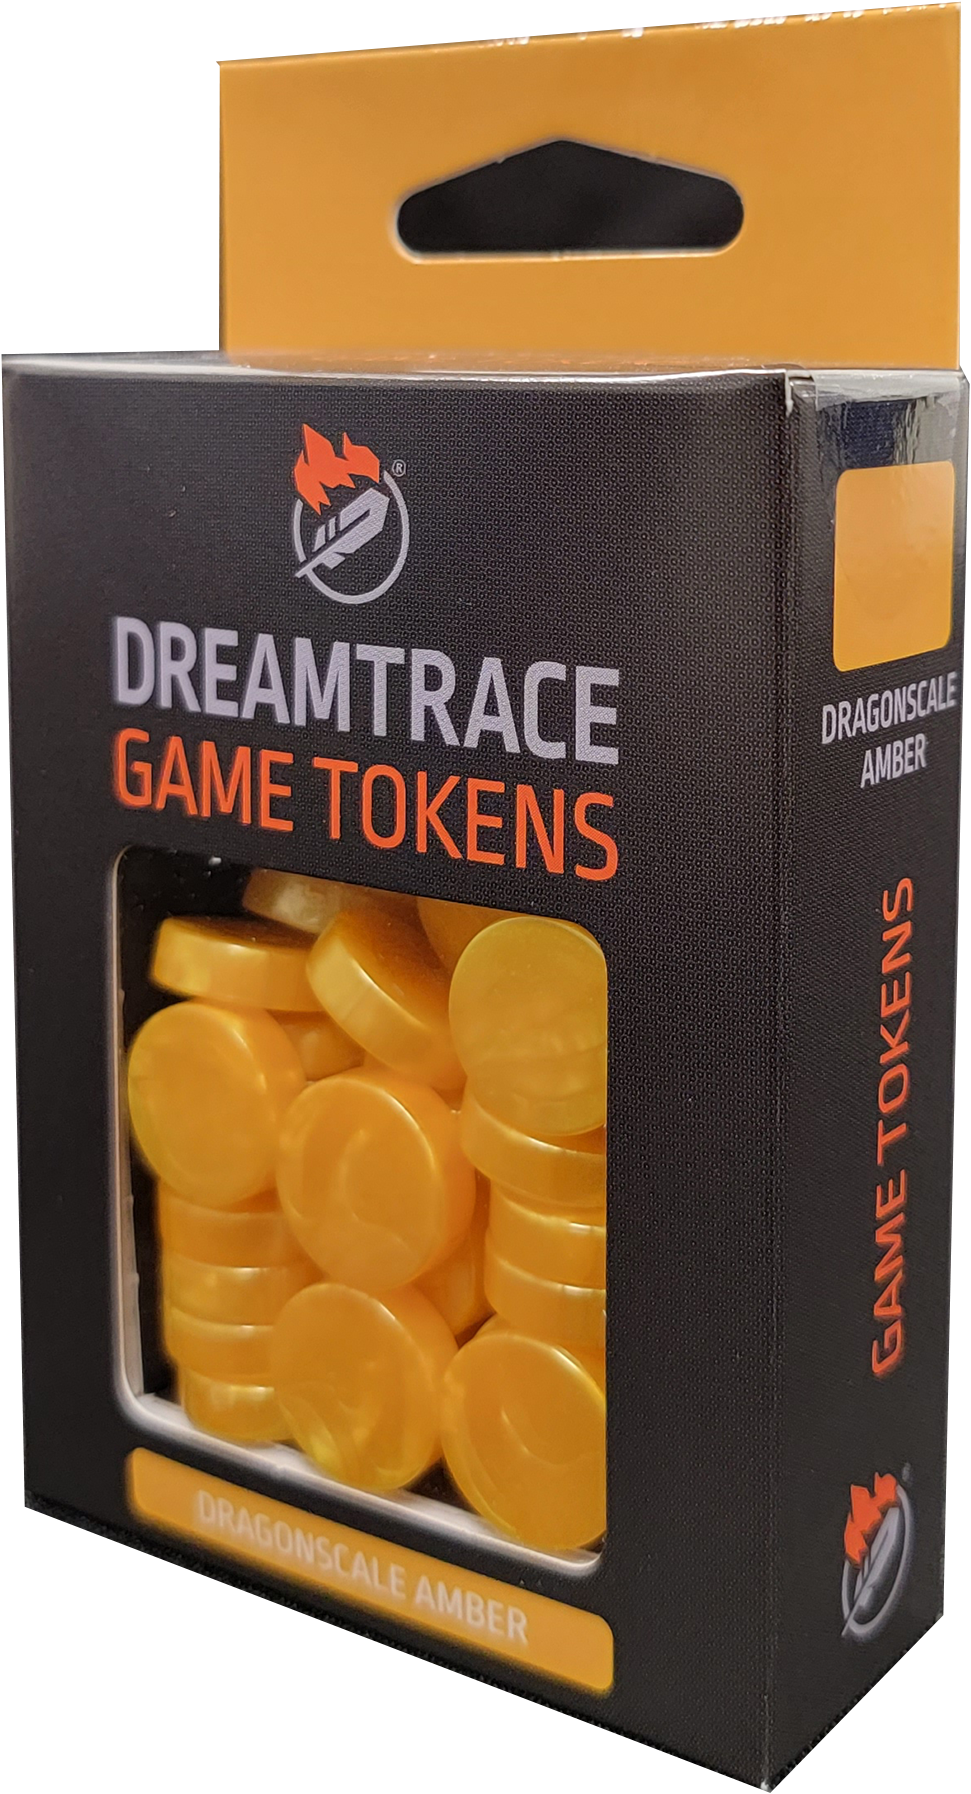 Dreamtrace Gaming Tokens: Dragonscale Amber 